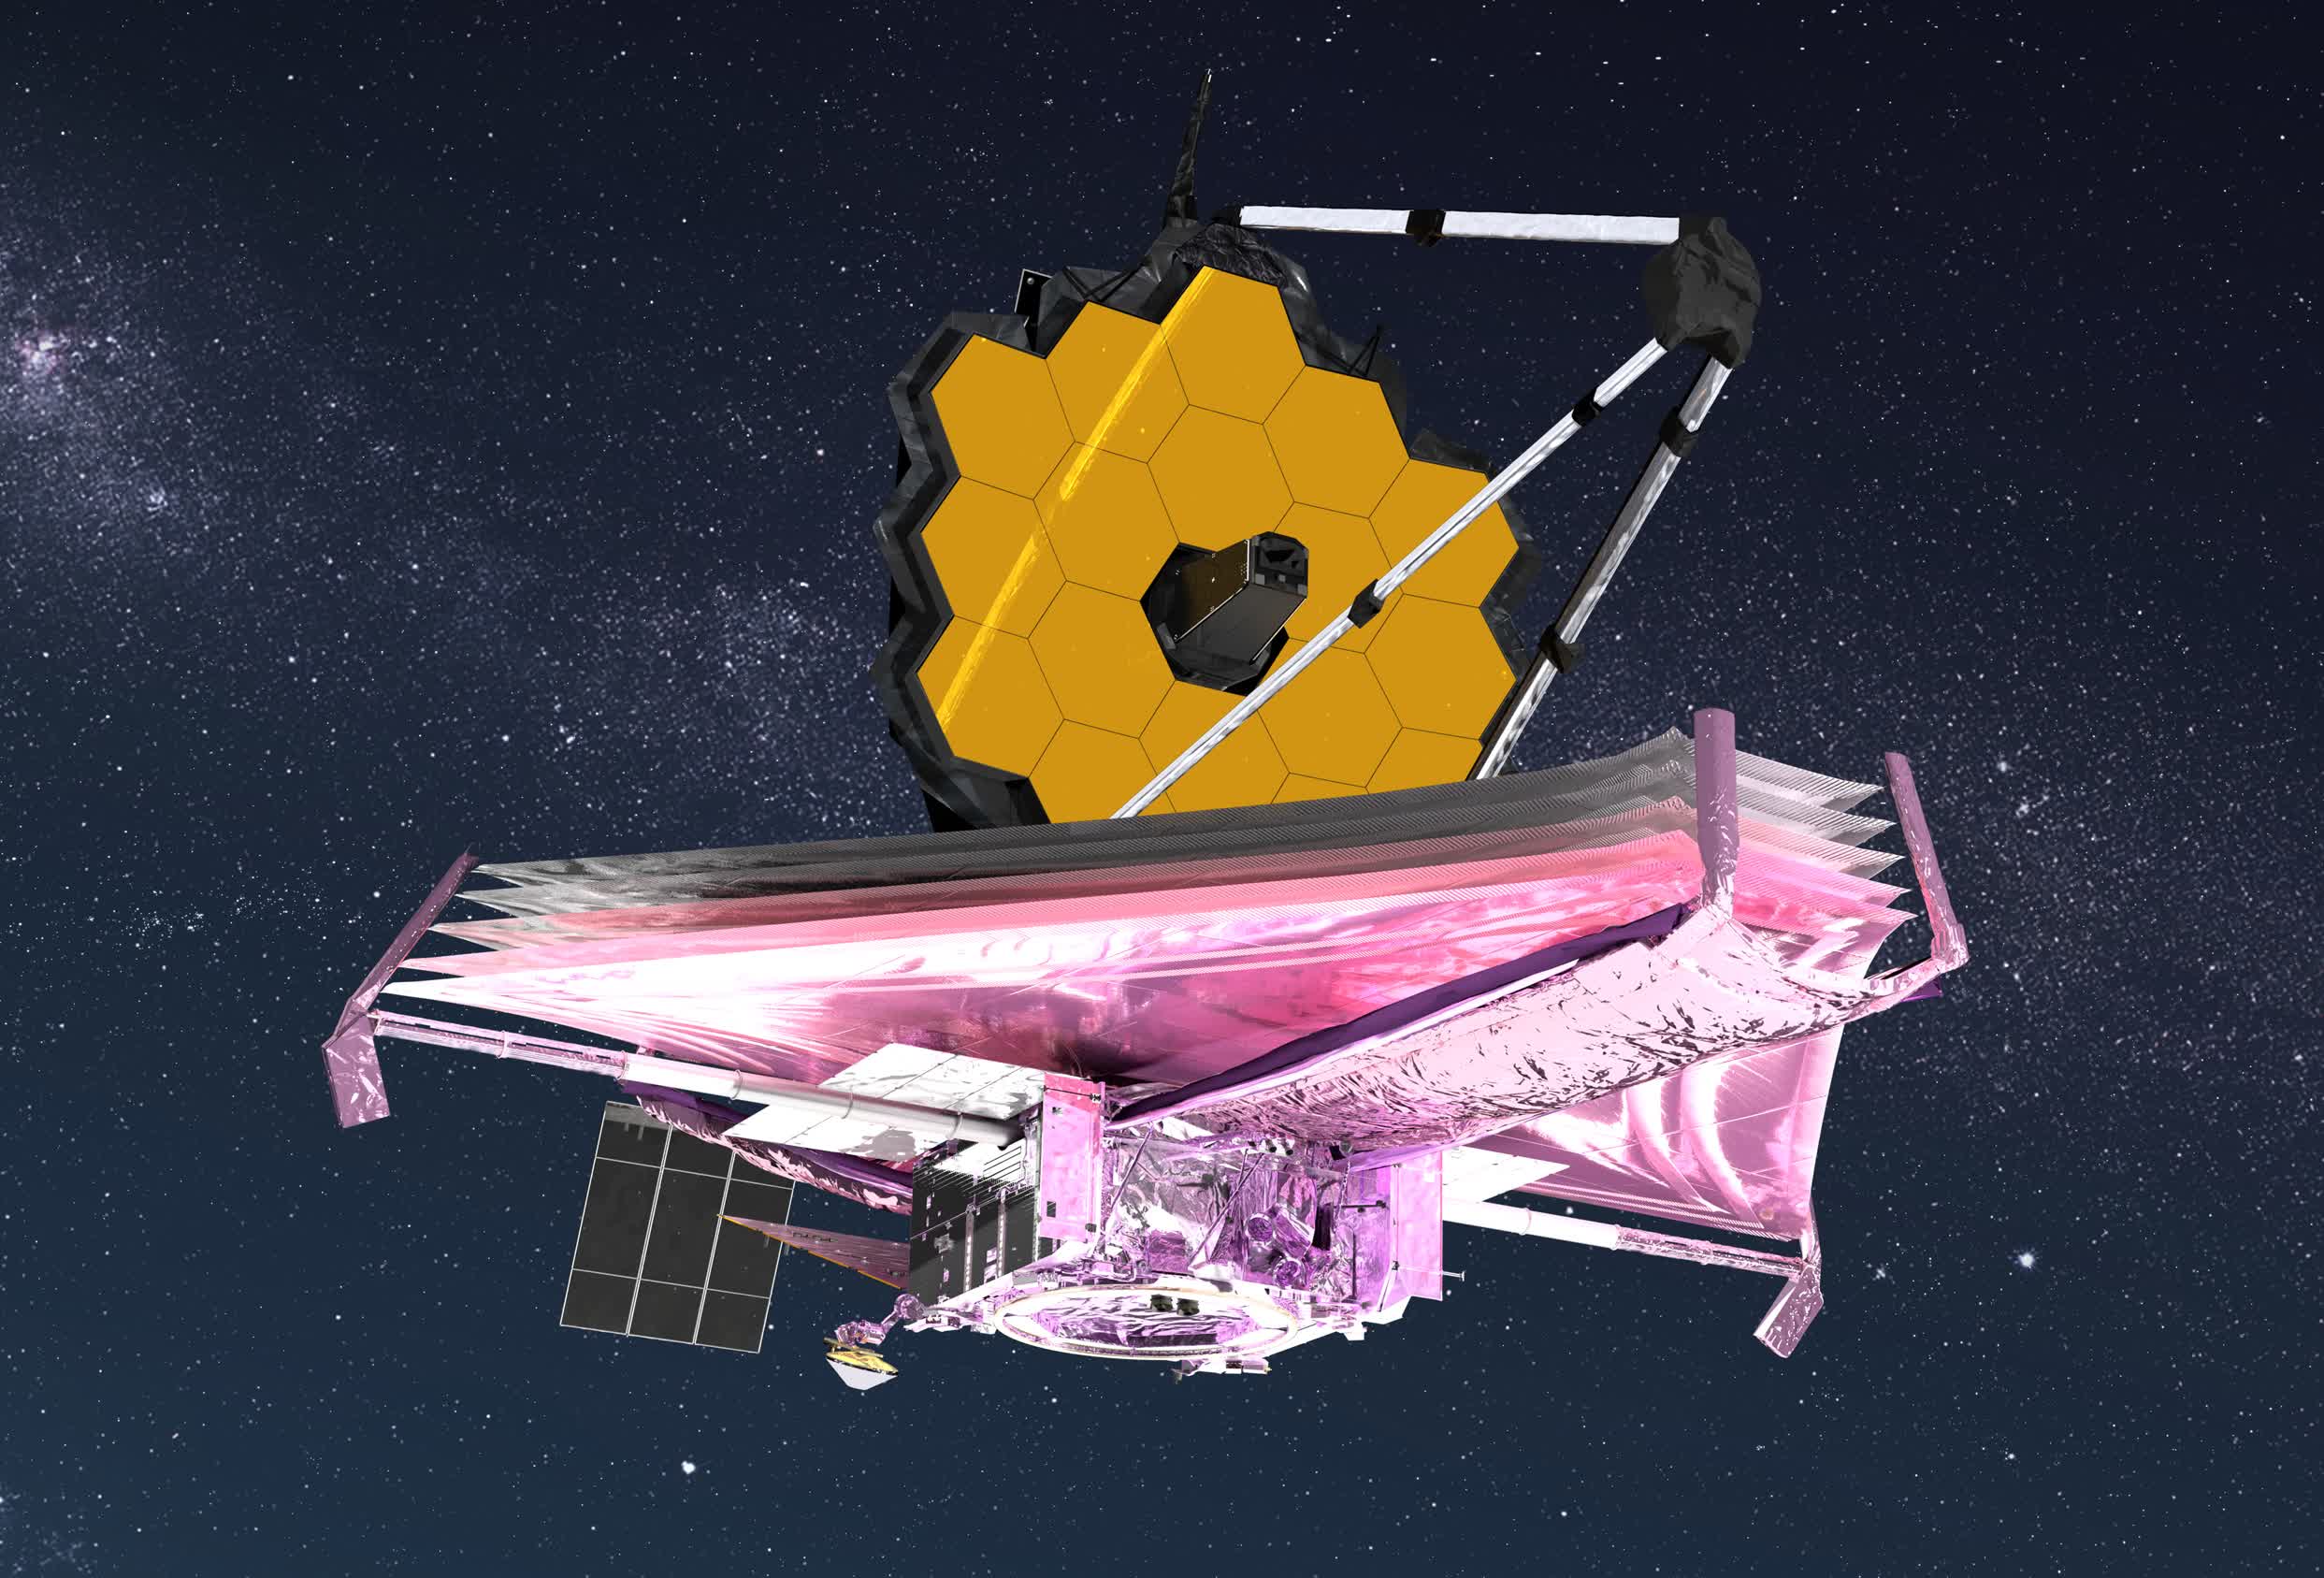 NASA shares images from Webb Space Telescope's coldest instrument